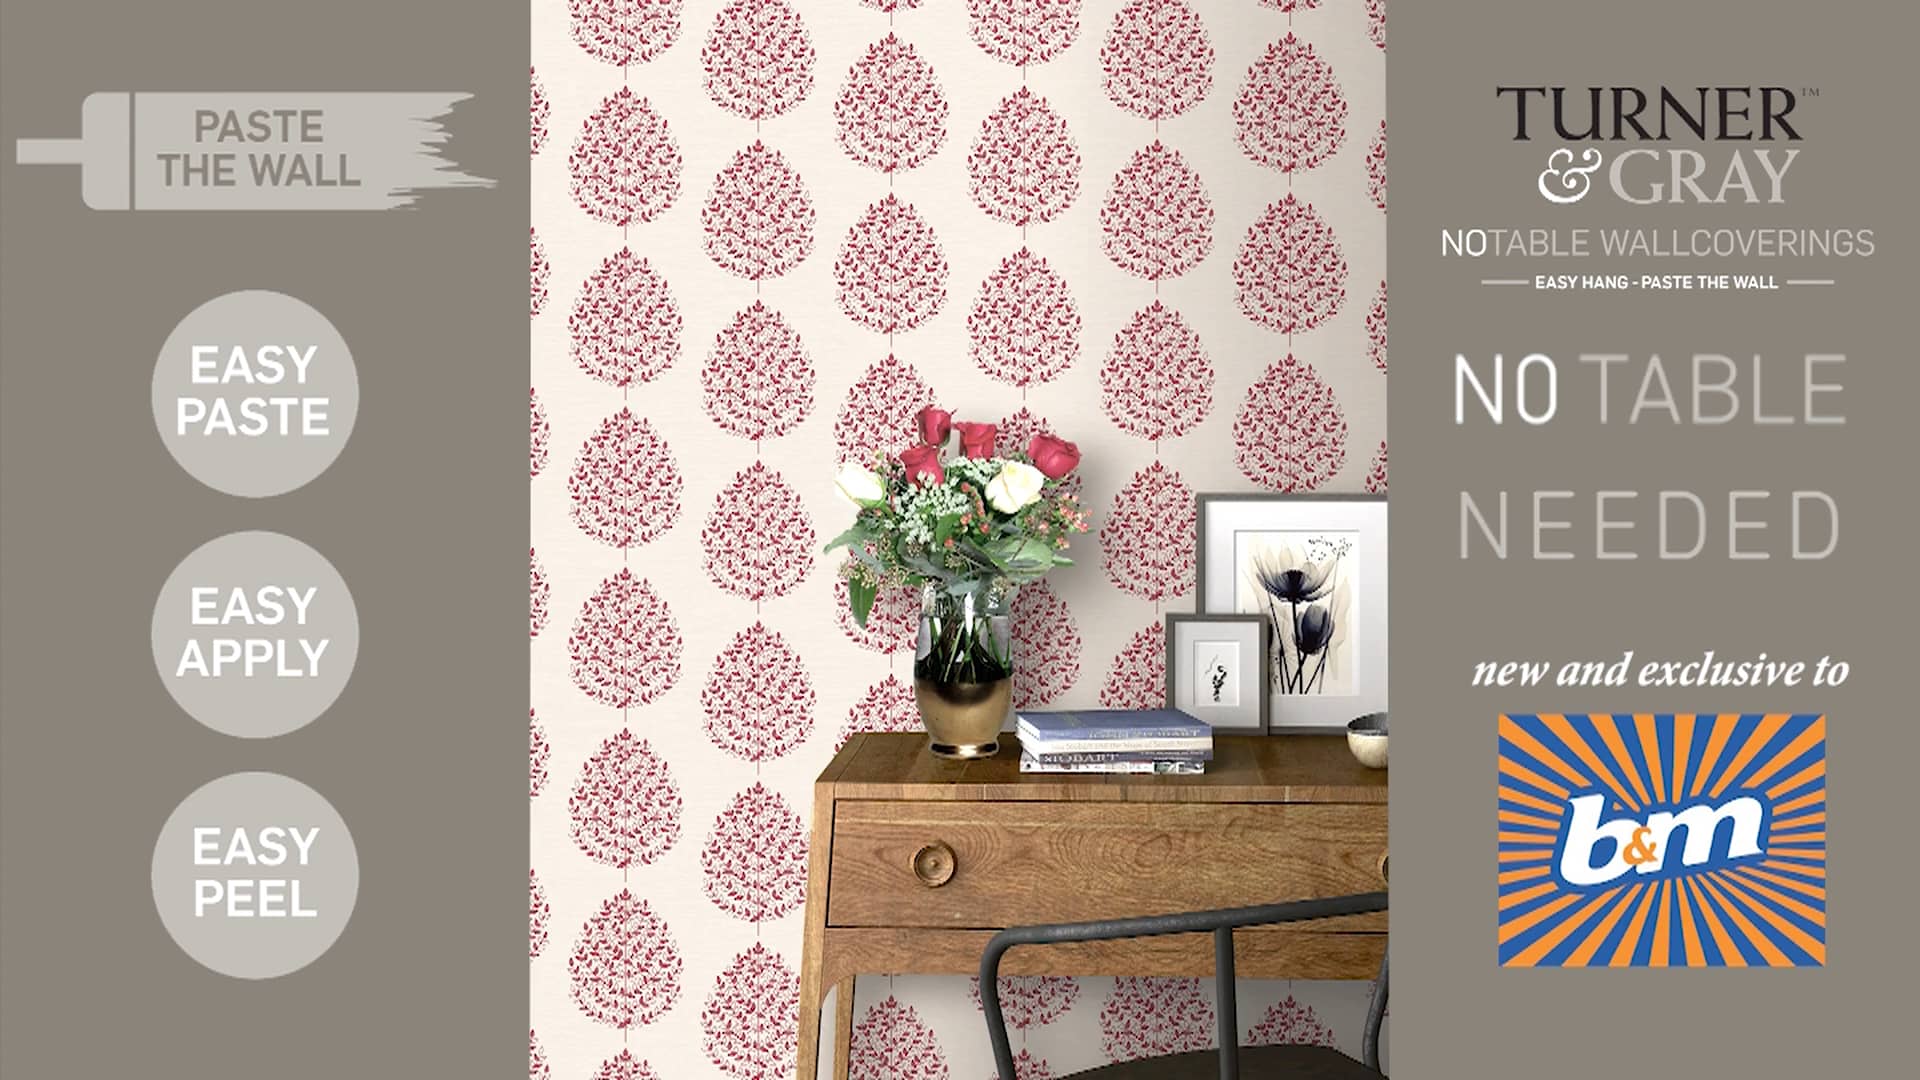 How To Hang Turner Gray Paste The Wall Wallpaper B M Stores On